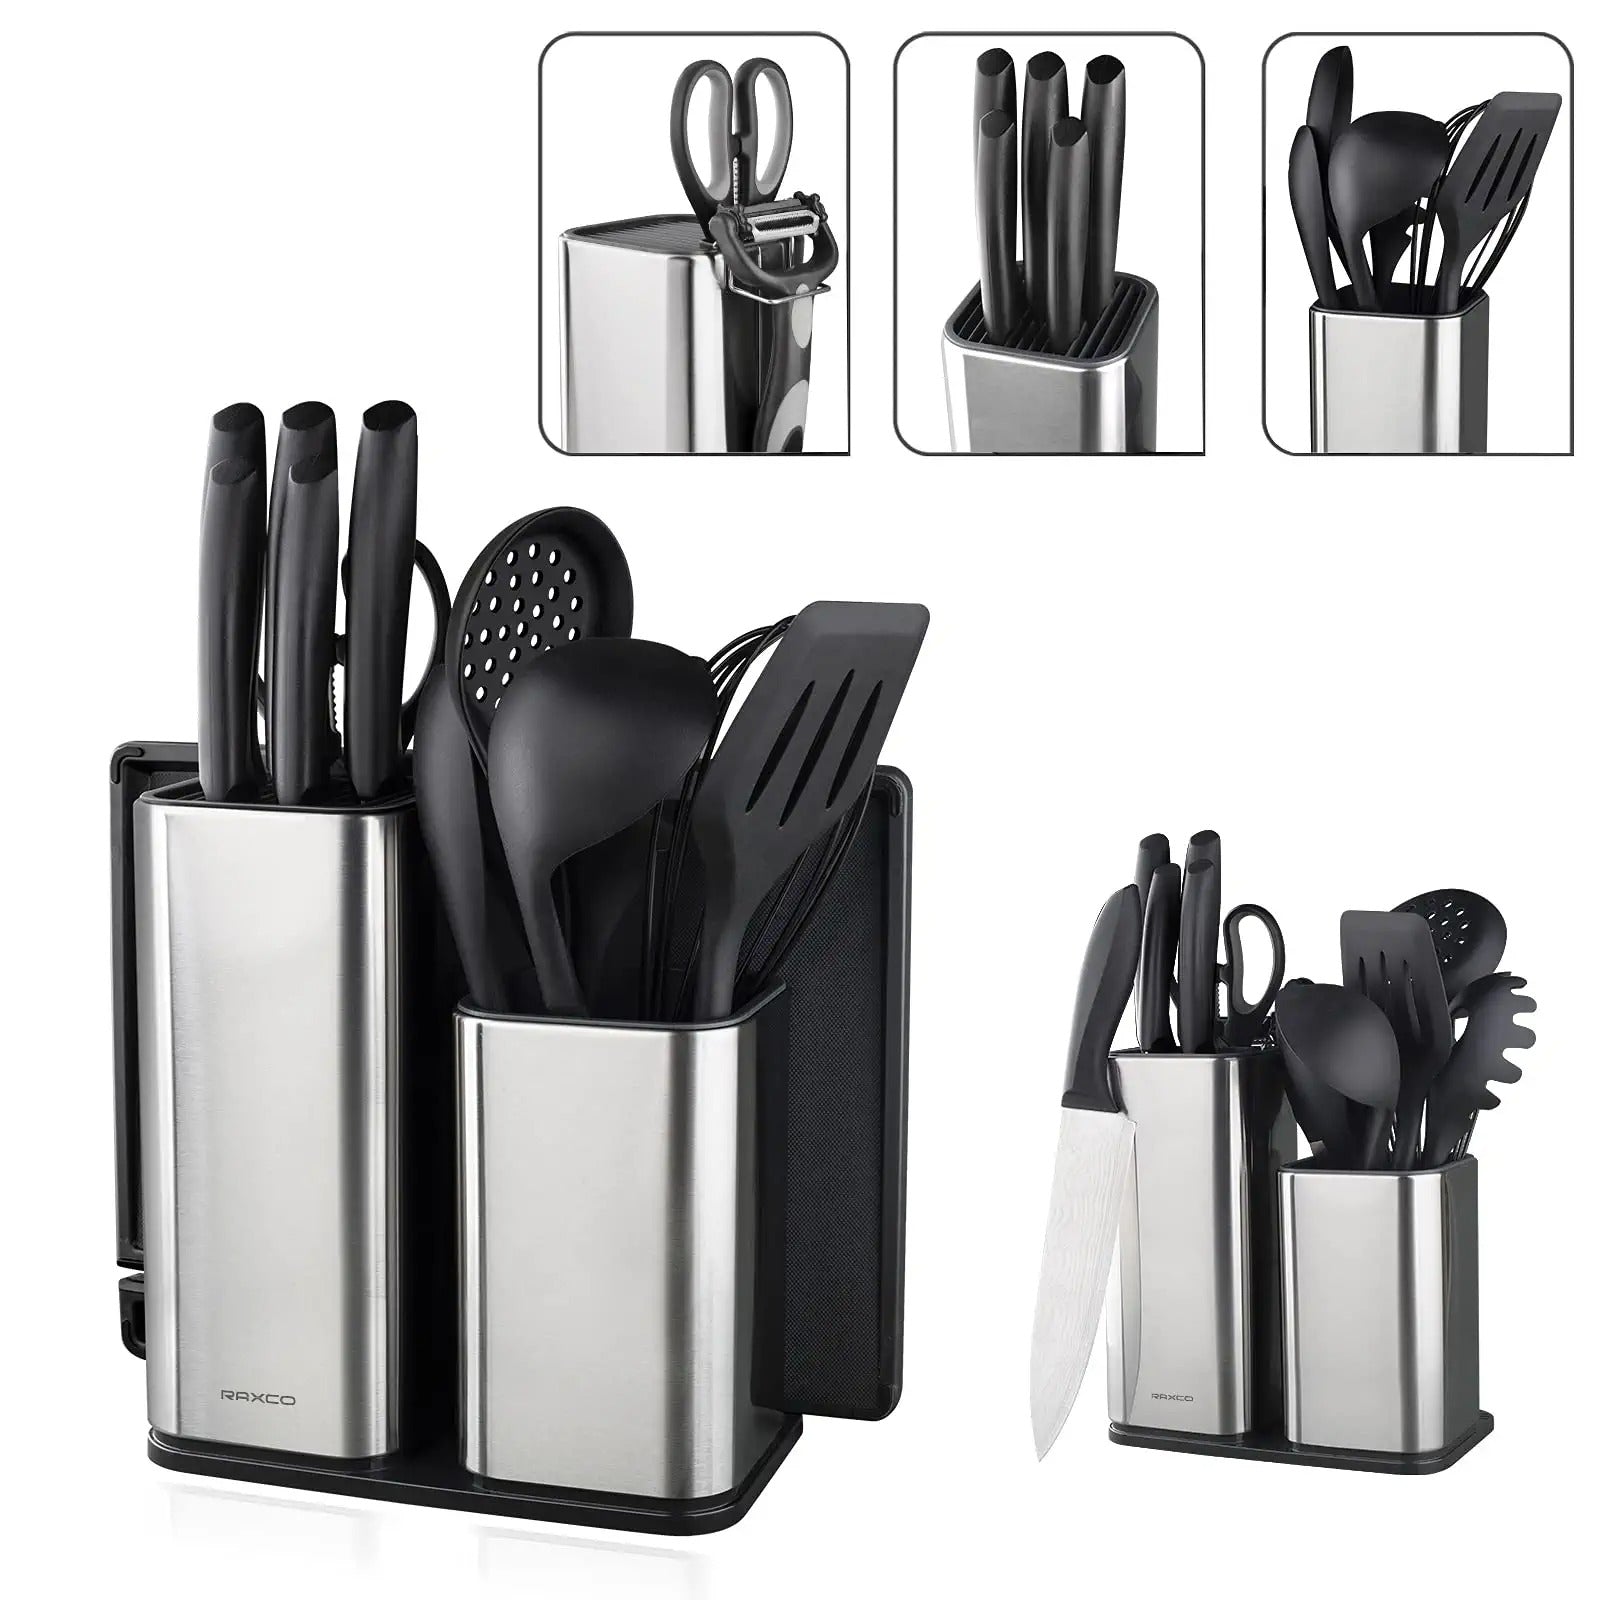 Stainless Steel Cooking Silicone Kitchen Utensils Set Of 11 Pcs - HomeHero